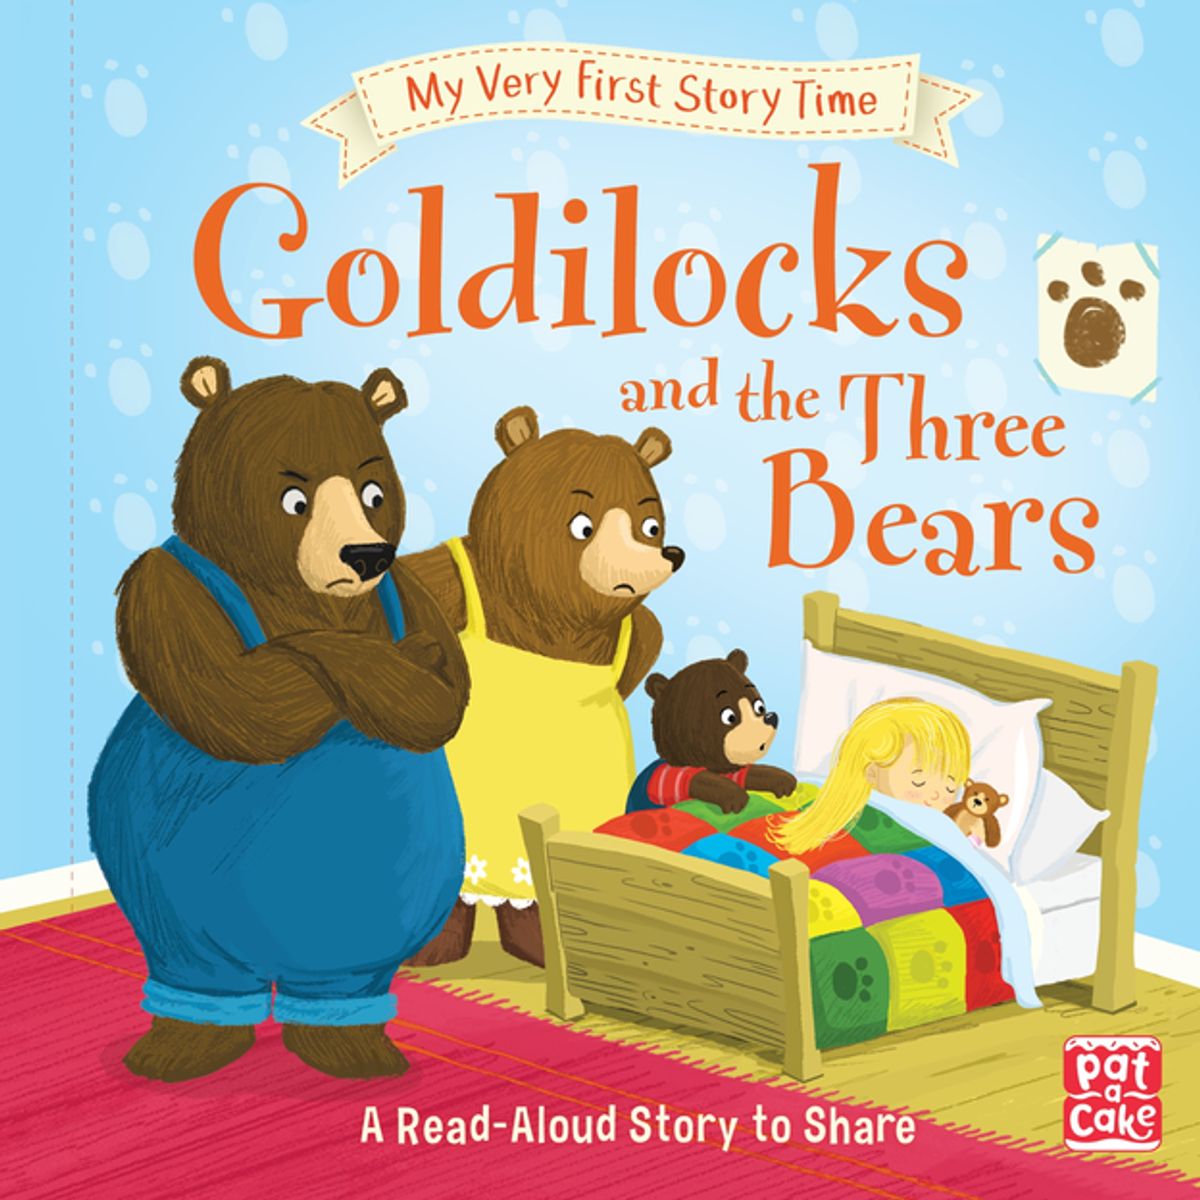 Image of book cover for Goldilocks and the Three Bears